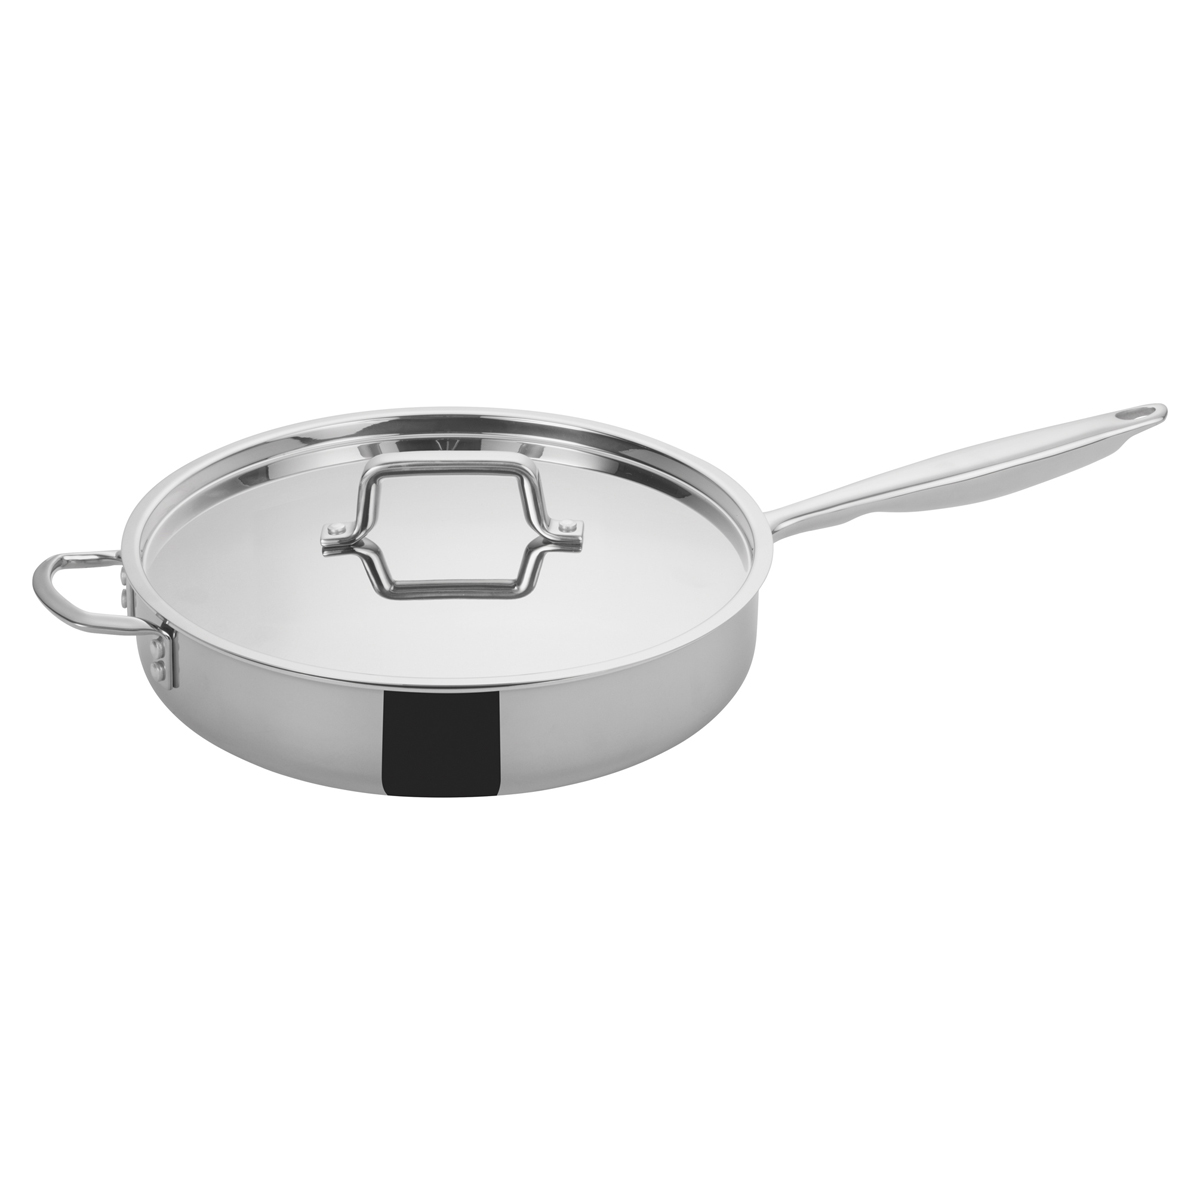 Winware Stainless Steel 6 Quart Sauce Pan with Cover 